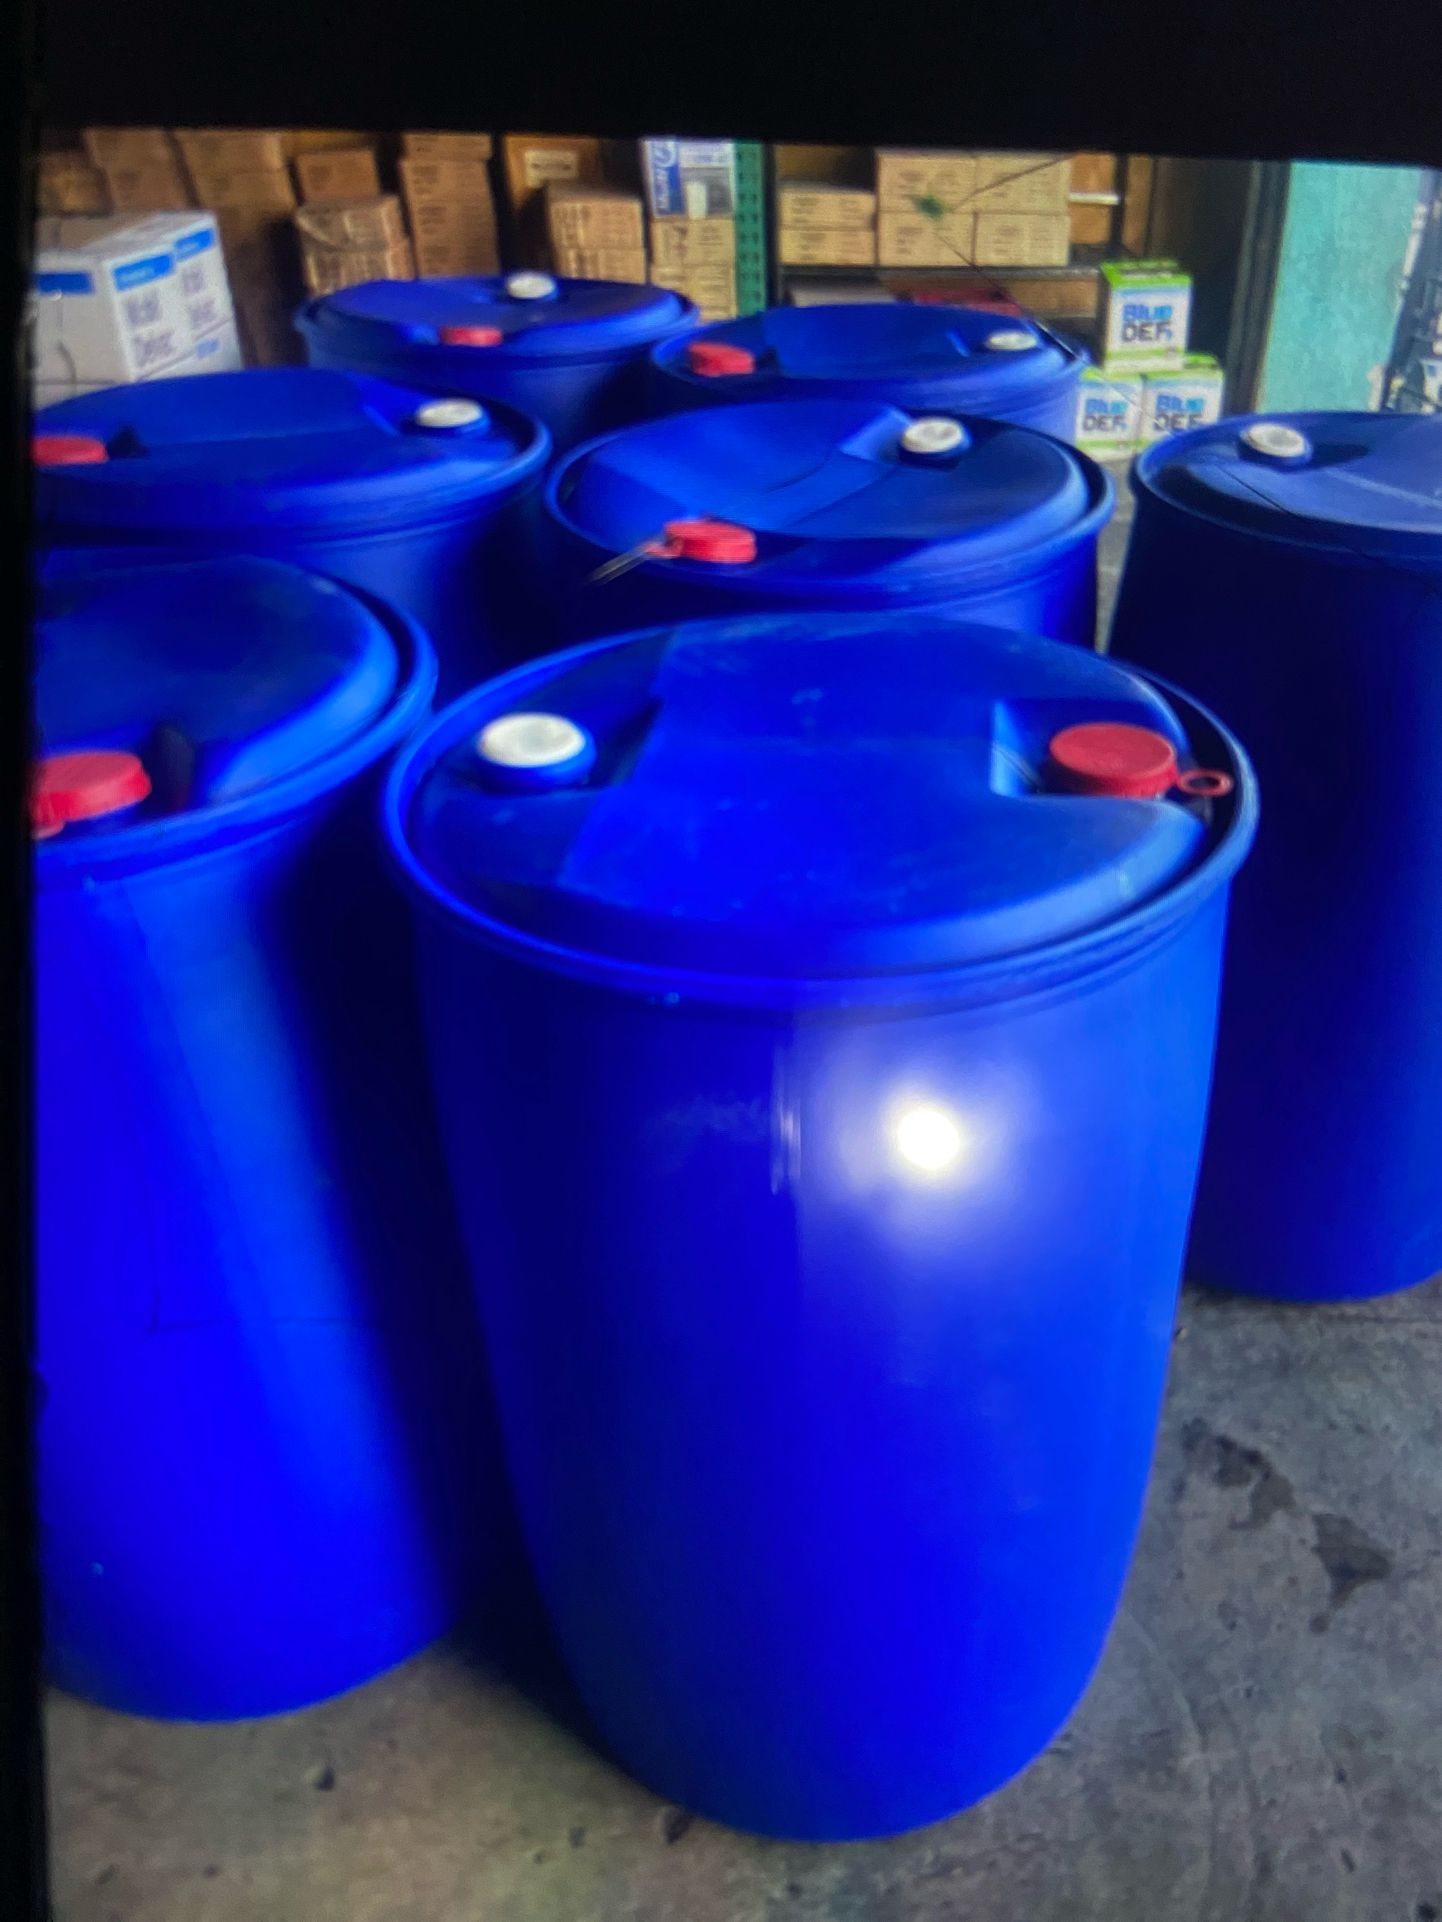 PLASTIC 55 GALLON DRUMS  GREAT CONDITION $20